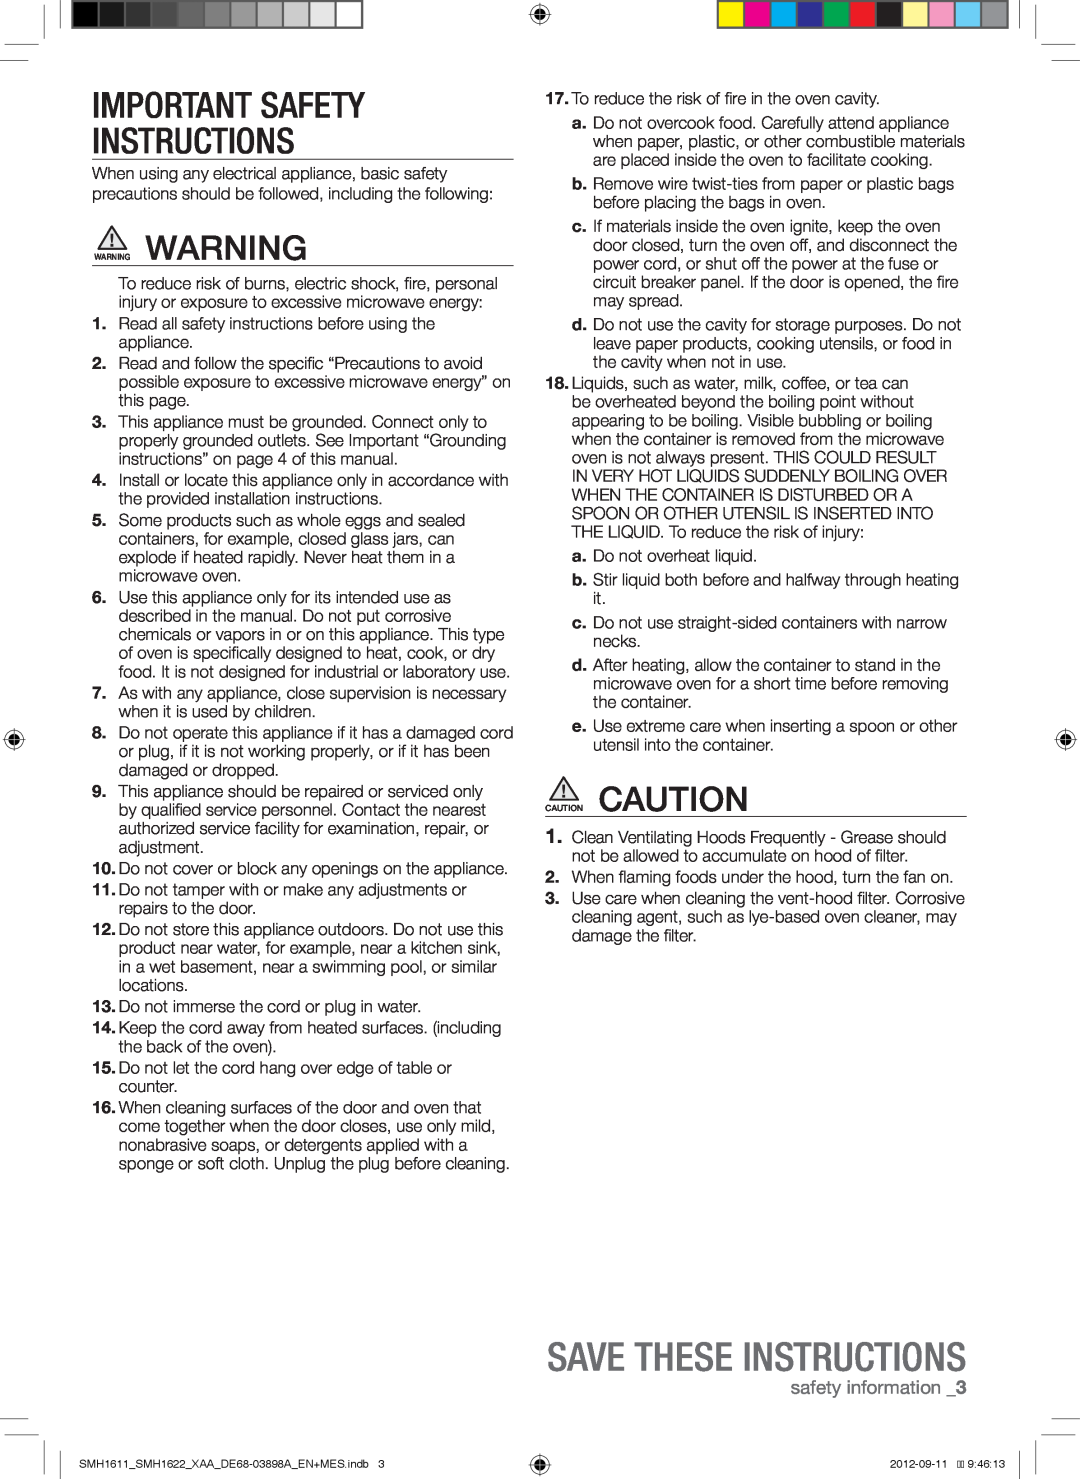 Samsung SMH1622B, SMH1622S, SMH1611, SMH1622W Save These Instructions, Important Safety Instructions, safety information 